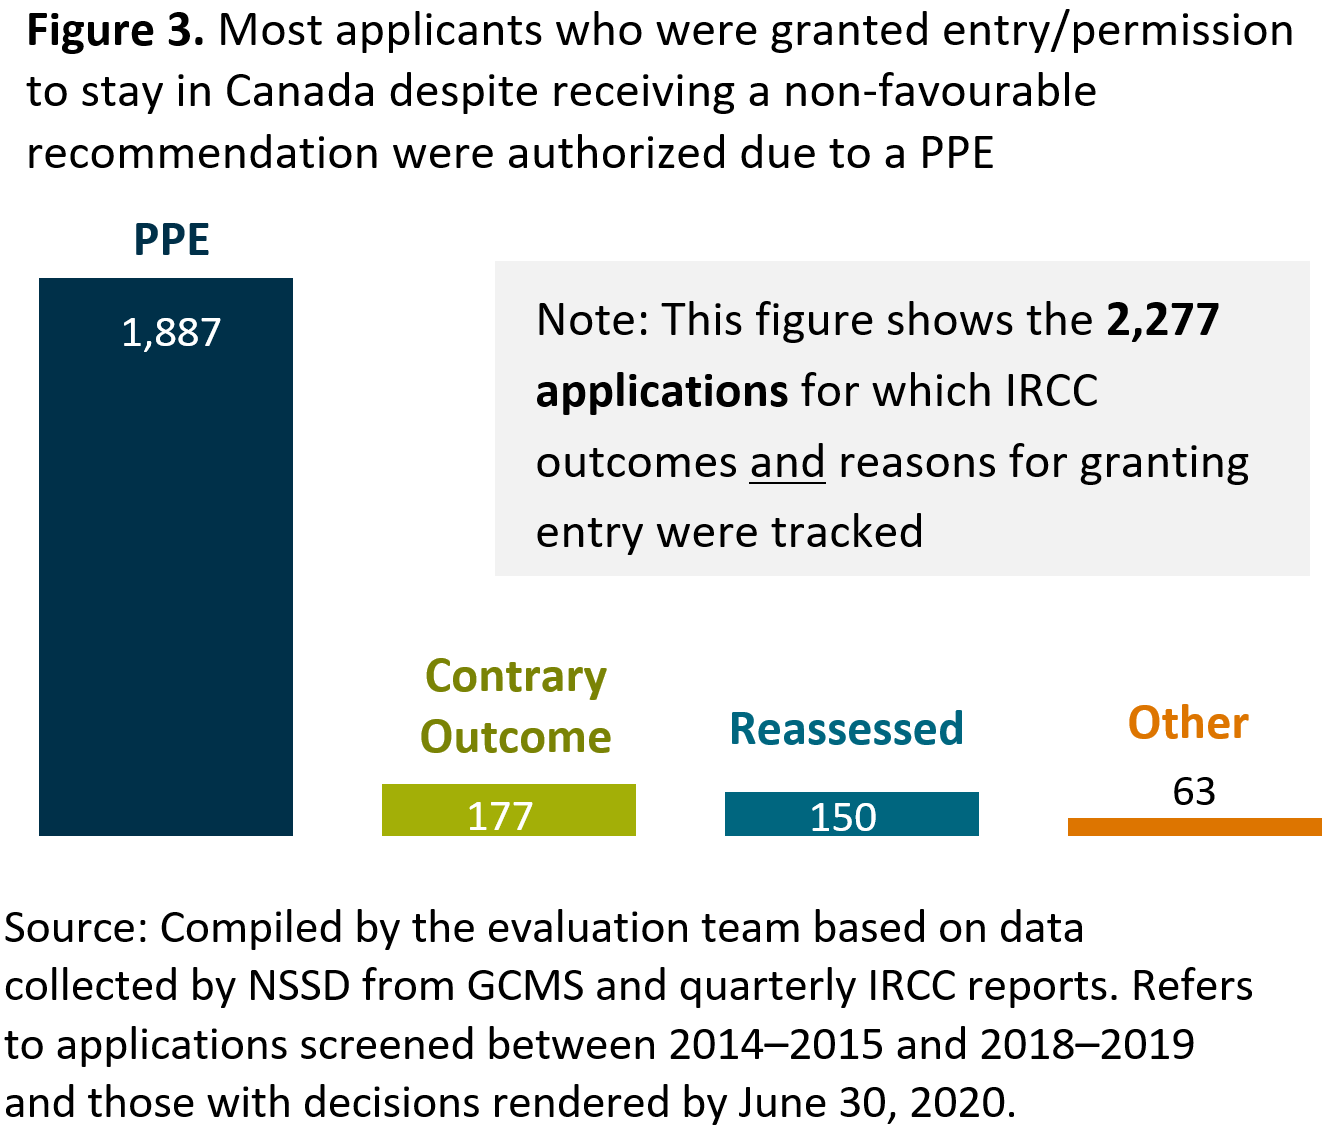 Figure 3 shows that most applicants who were granted entry/permission to stay in Canada despite receiving a non-favourable recommendation were authorized due to a <abbr>PPE</abbr>.